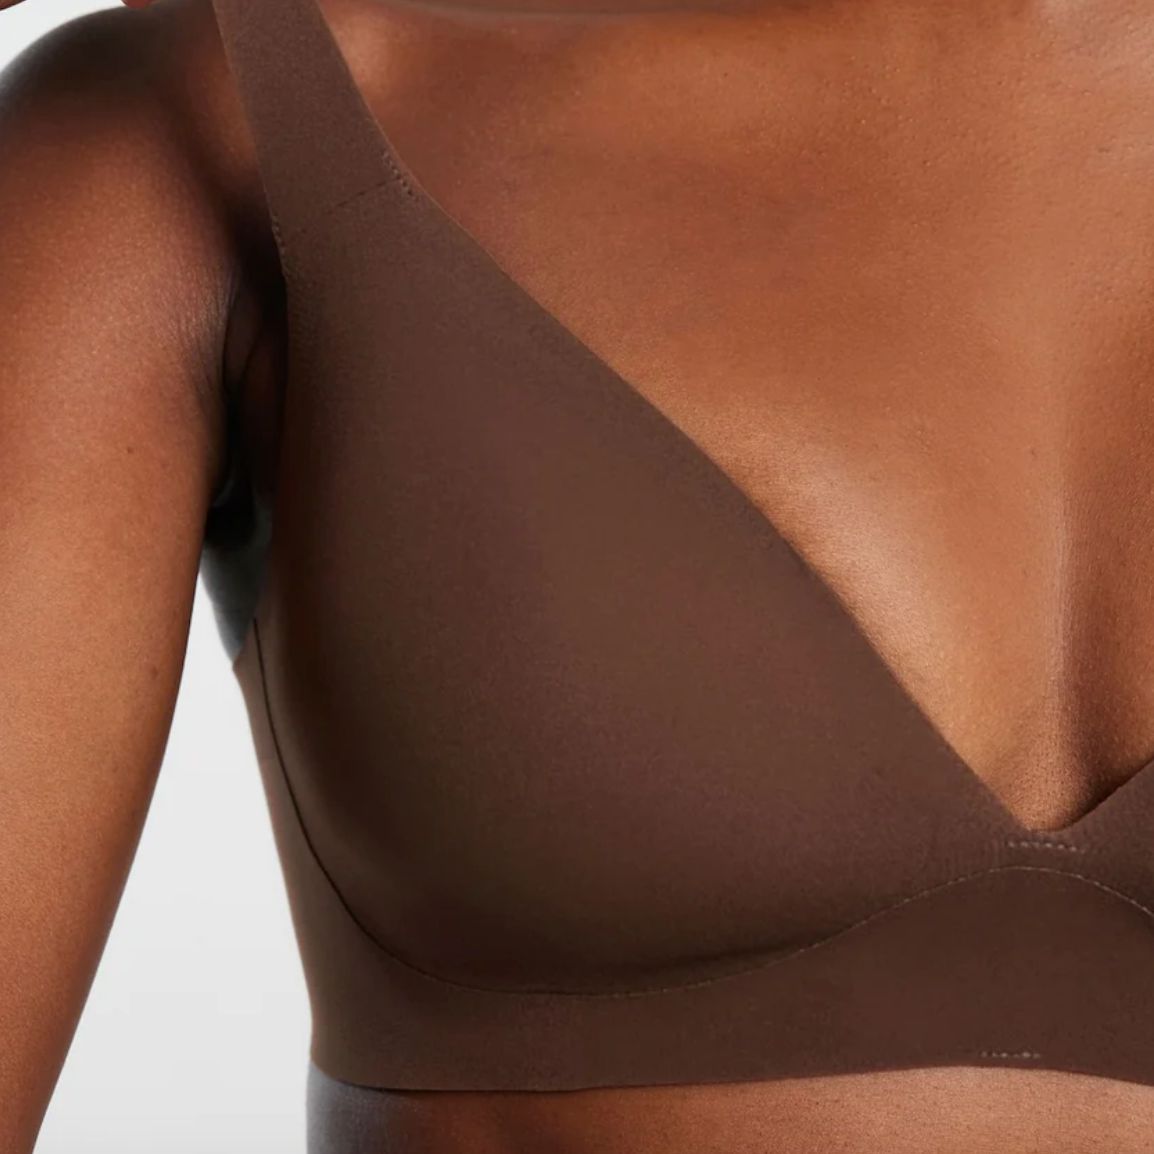 Evelyn & Bobbie Starlette Plunge Bra in Umber-Non-Wired Bras-Evelyn & Bobbie-Umber-Small-Anna Bella Fine Lingerie, Reveal Your Most Gorgeous Self!